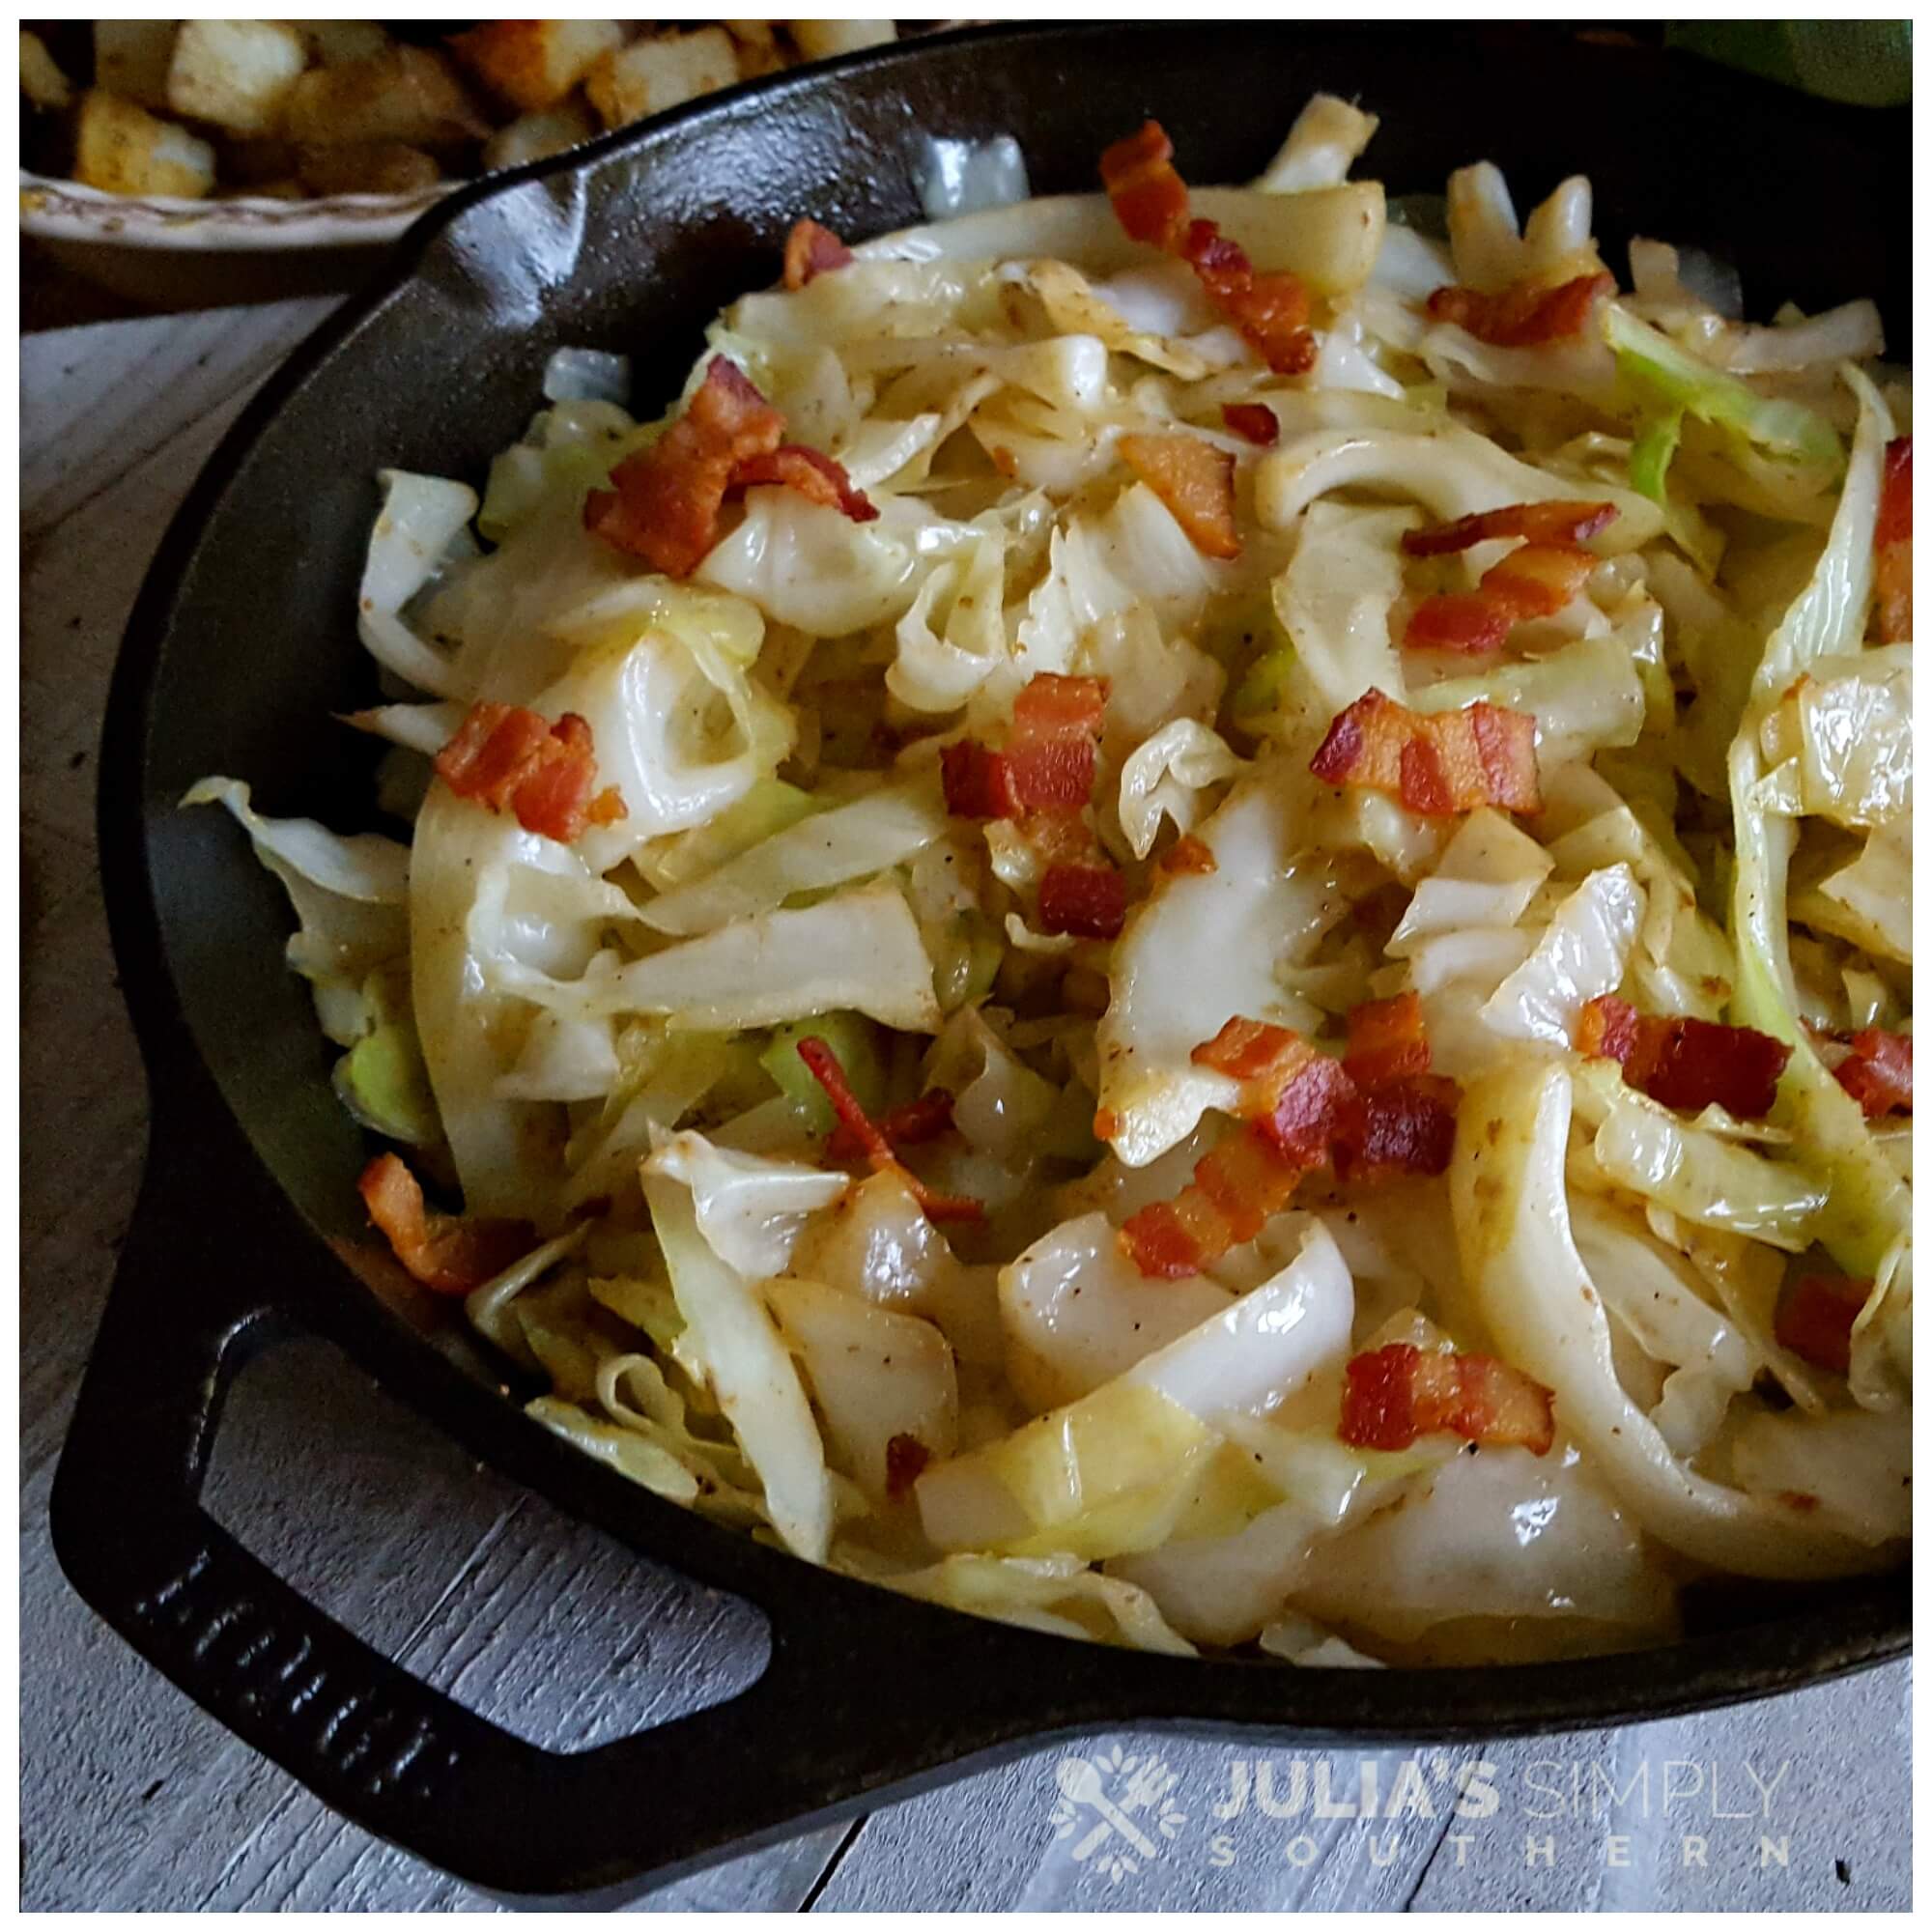 Southern Fried Cabbage Recipe - Julias Simply Southern